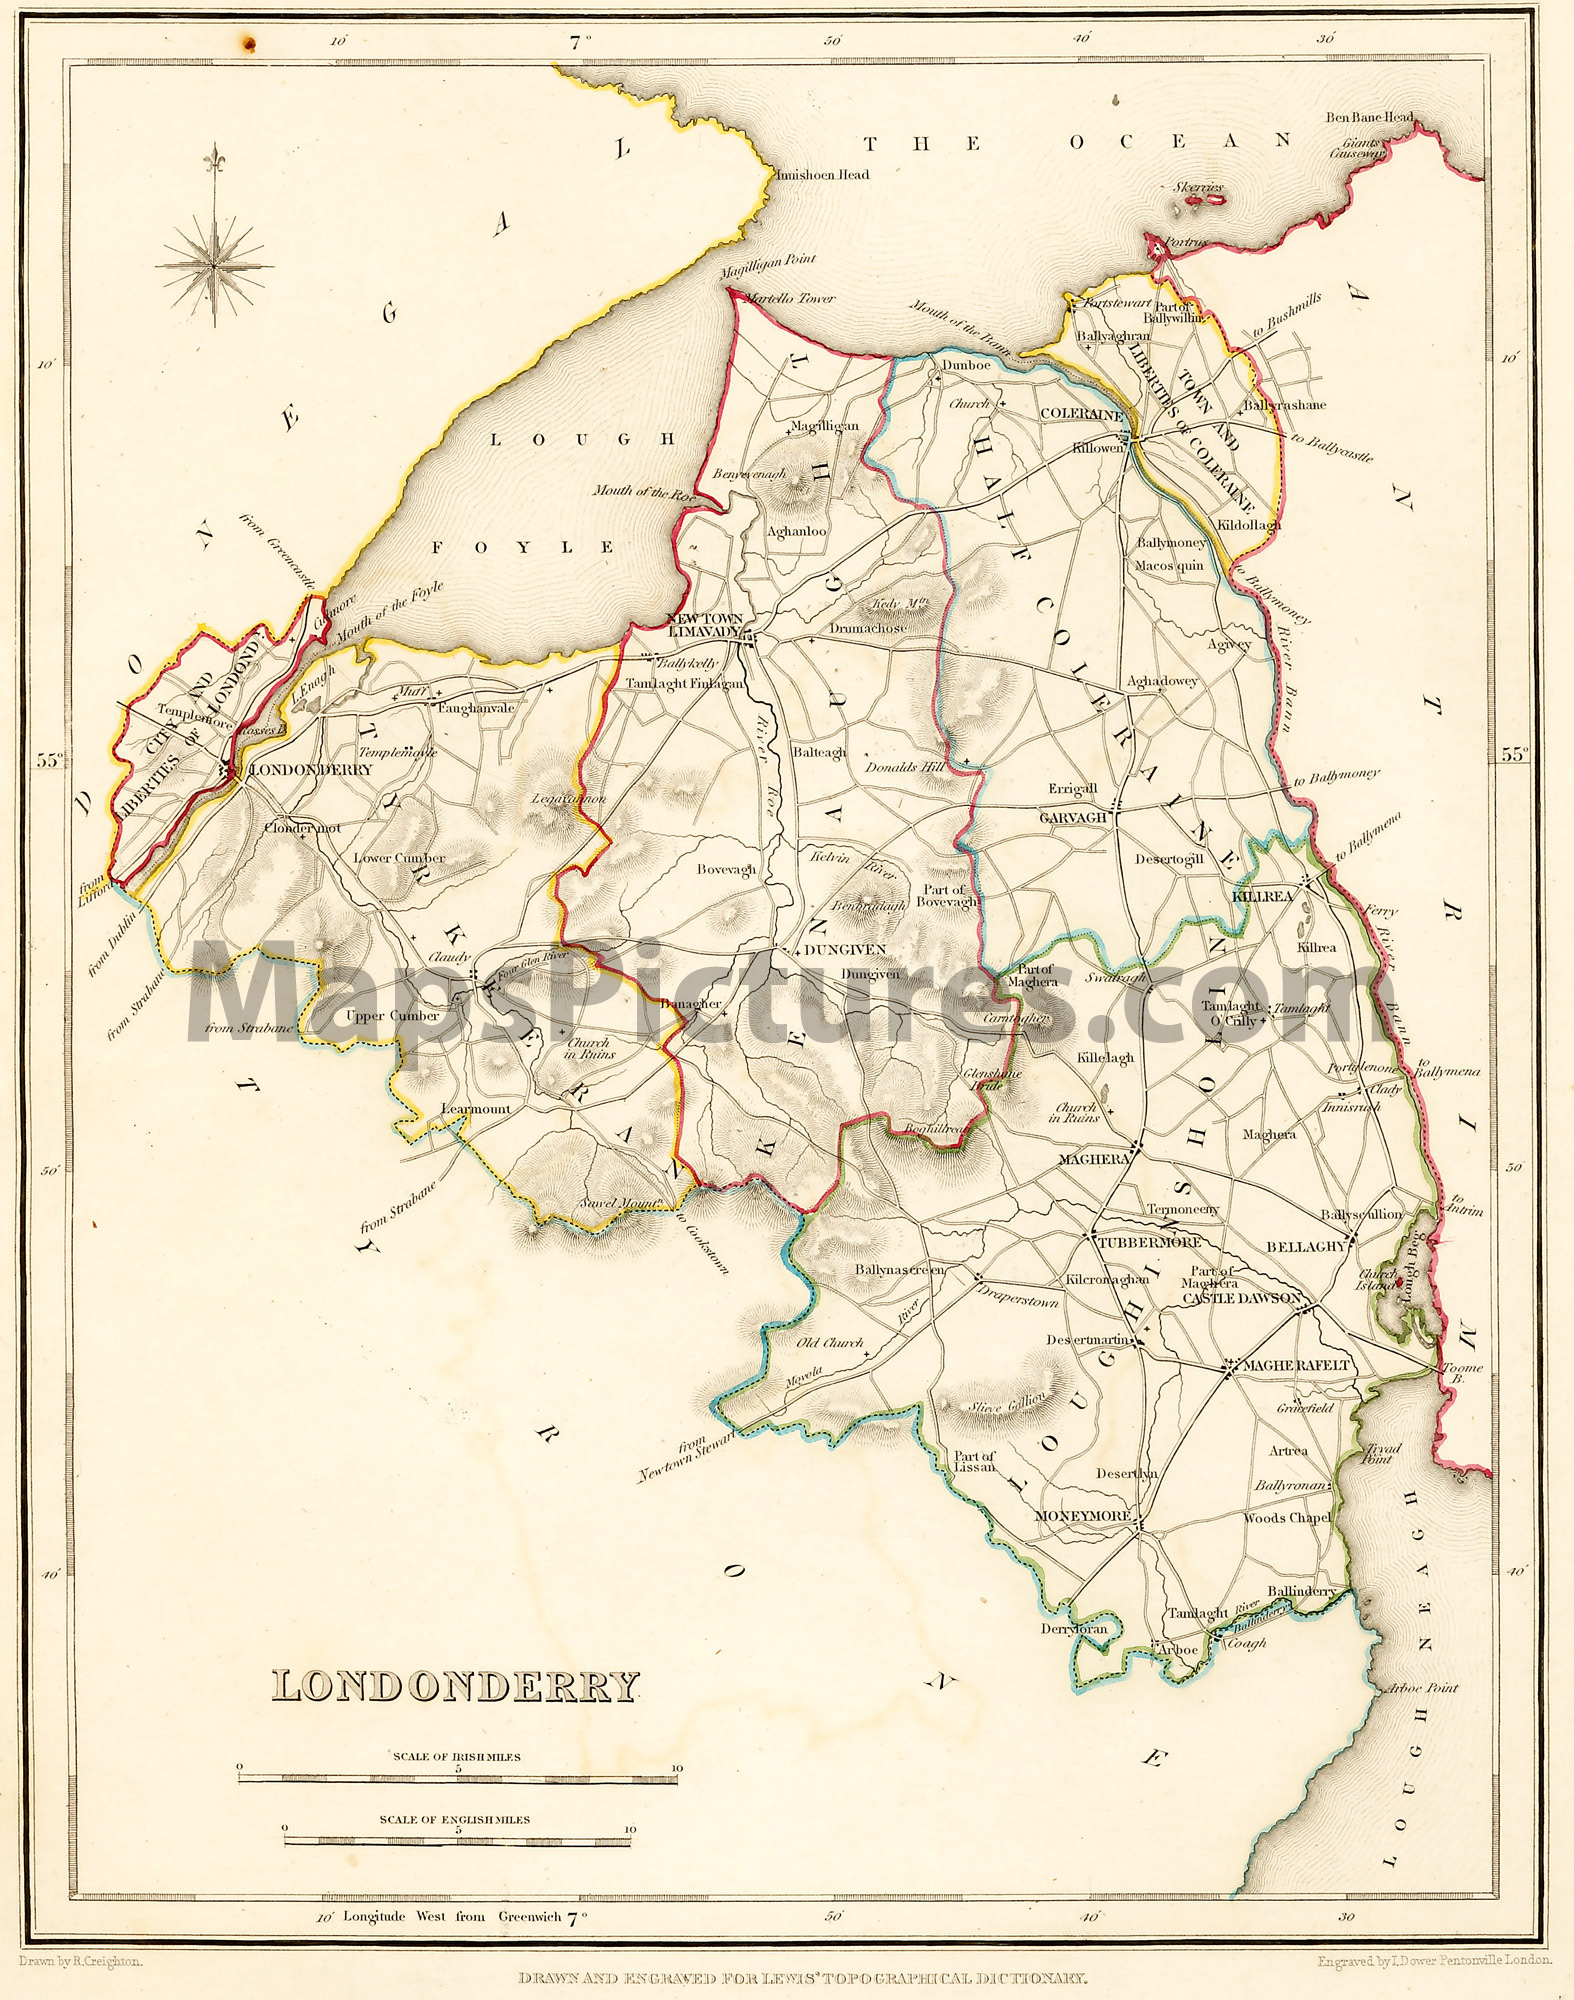 map of derry county County Londonderry Ireland Map 1837 map of derry county